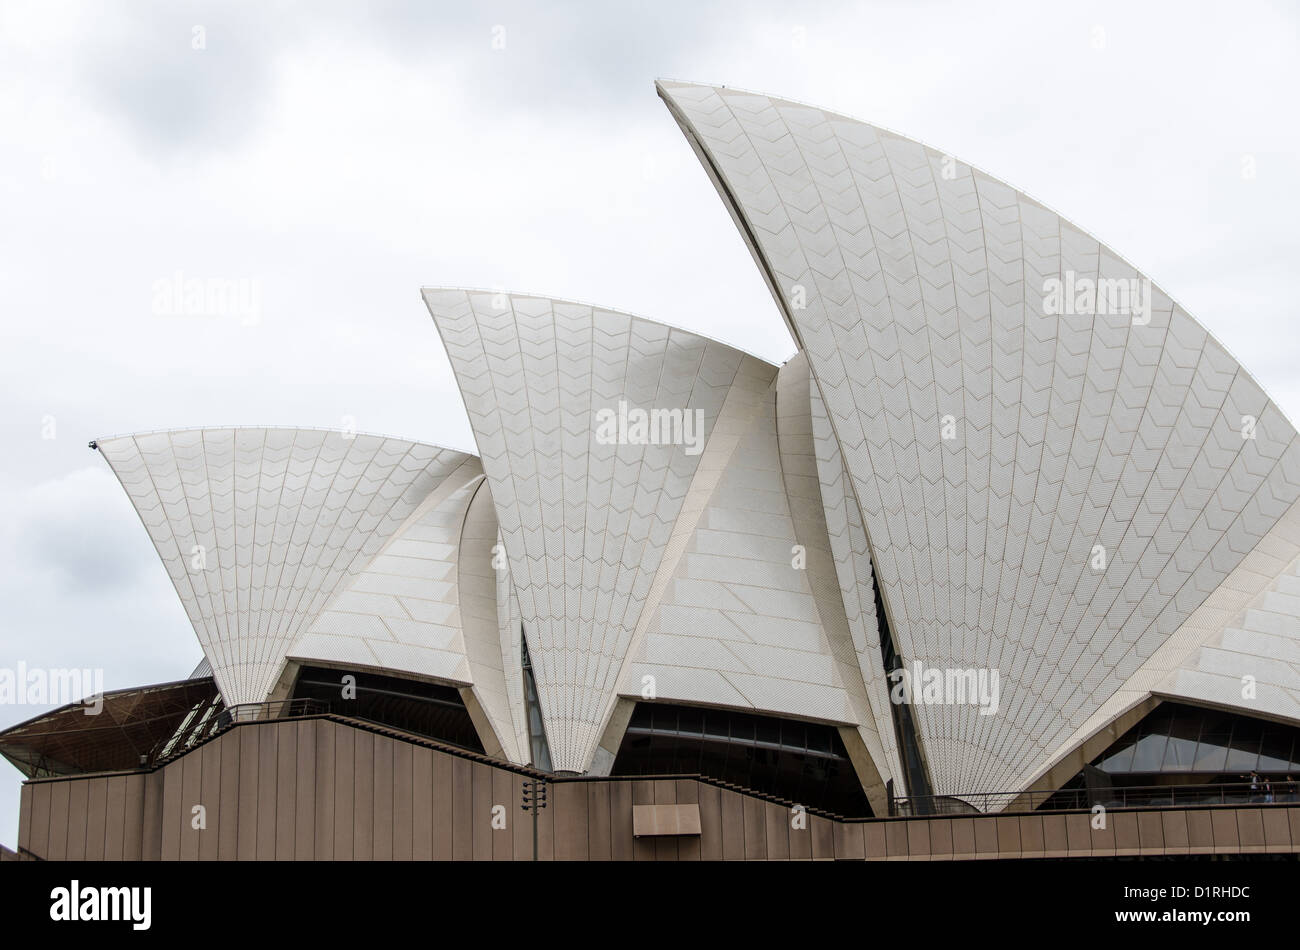 SYDNEY, Australia - SYDNEY, Australia - Side view of the sails of the roof of the Sydney Opera House, situated prominently in Sydney Harbour, Sydney, Australia. Stock Photo